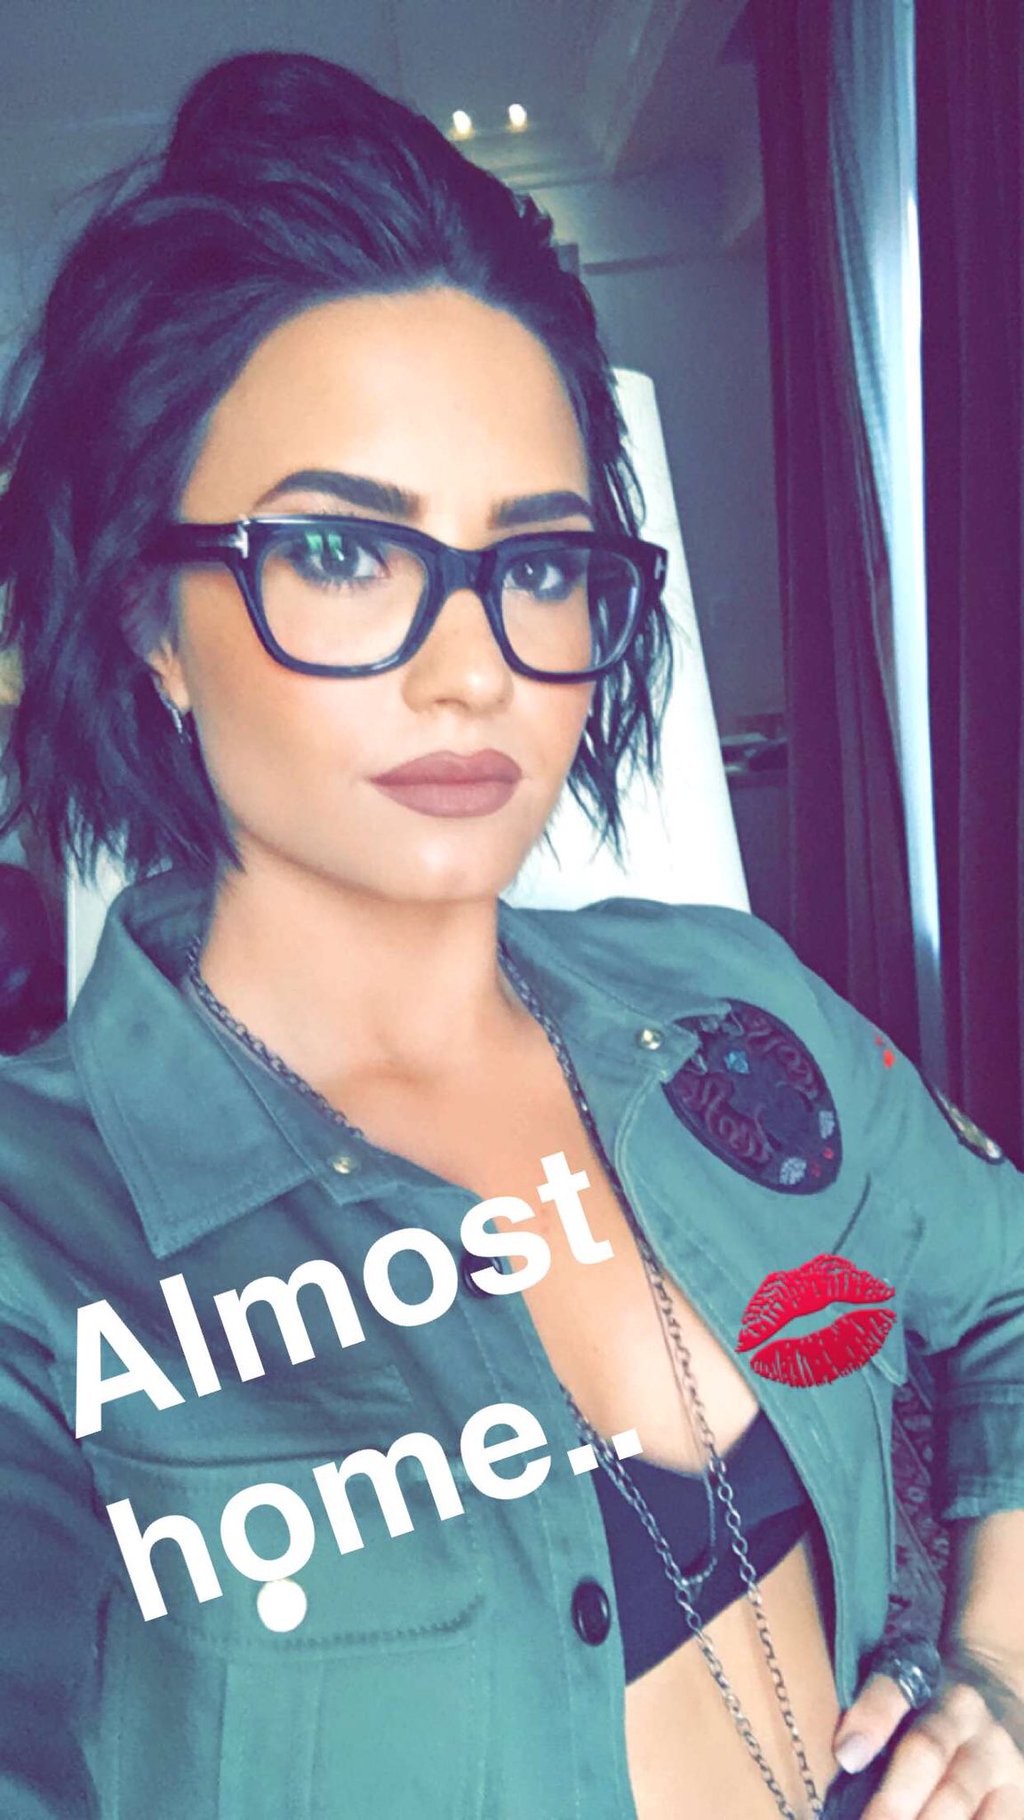 Check Out Demi Lovato S Snapchat Username And Find Other Celebrities To Follow